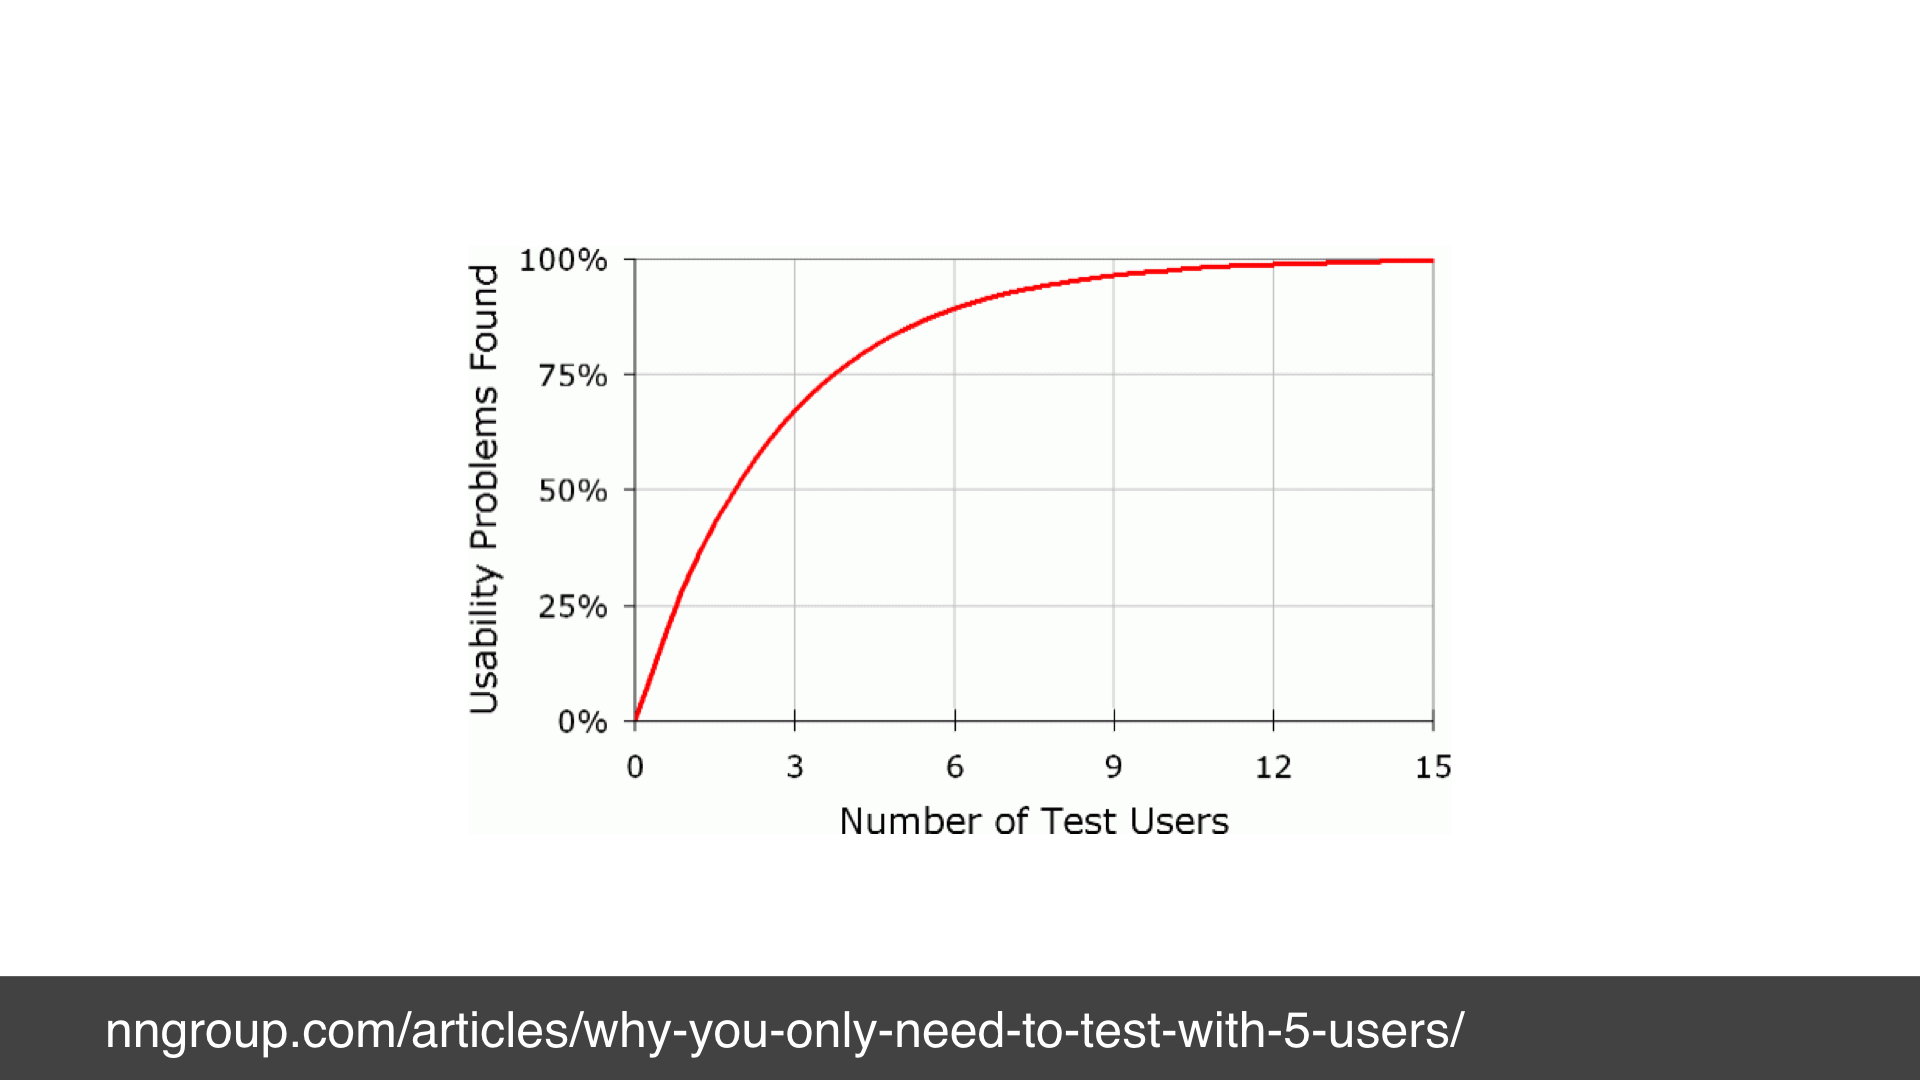 A graph showing that as you do usability testing with more users you find more defects. 1 user gives 31%, 5 users give around 75%, 15 users give around 100%